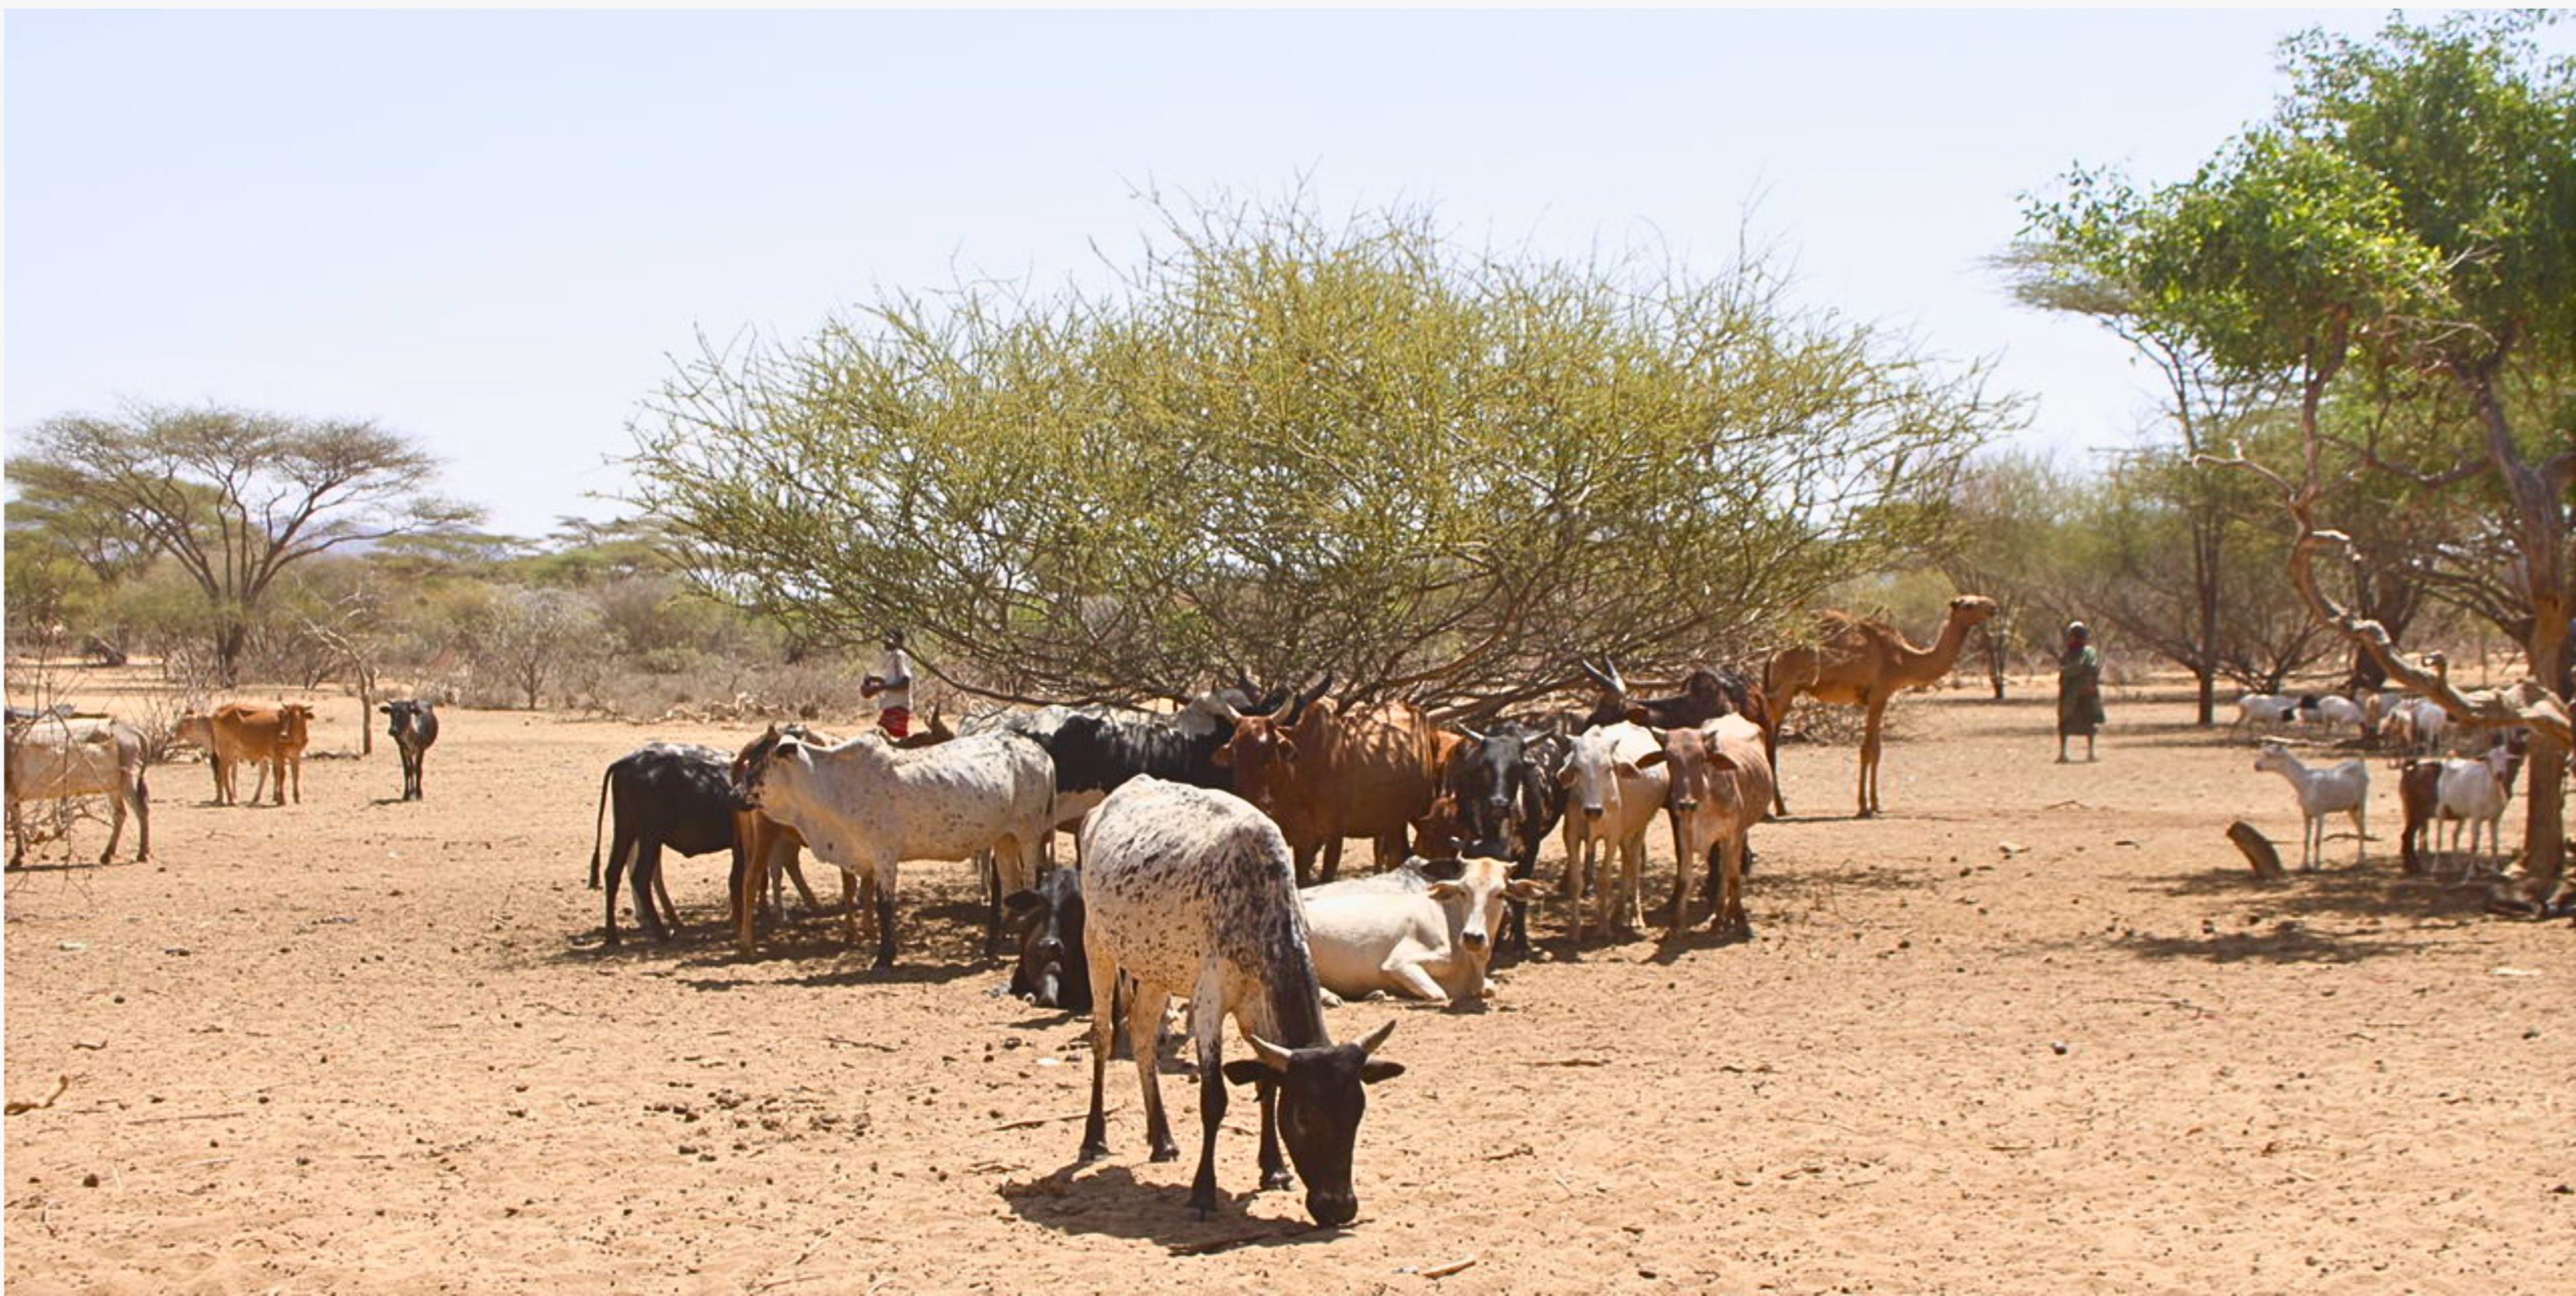 Livestock at a watering hole waiting to drink during there turn due to the drought caused by adverse climate change.